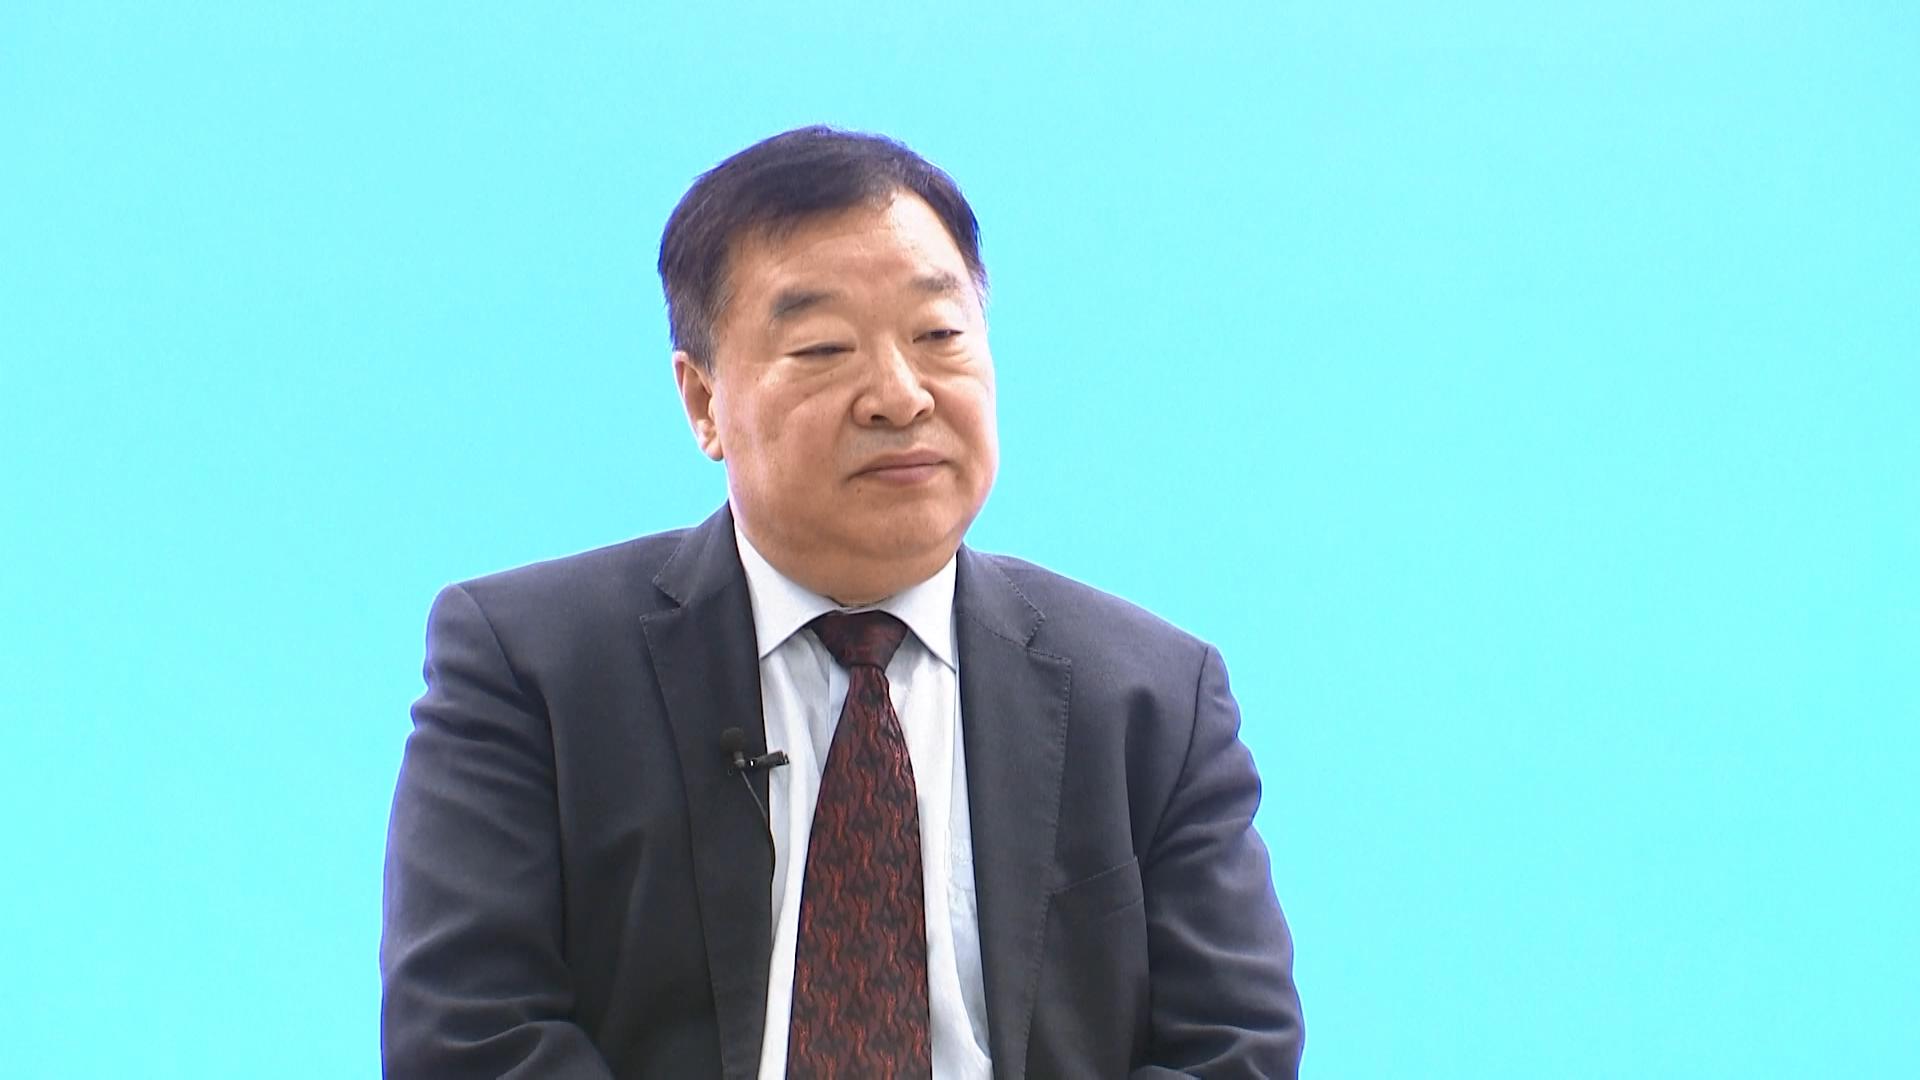 Liang Wannian, head of the COVID-19 response expert panel under China's National Health Commission. /China Media Group